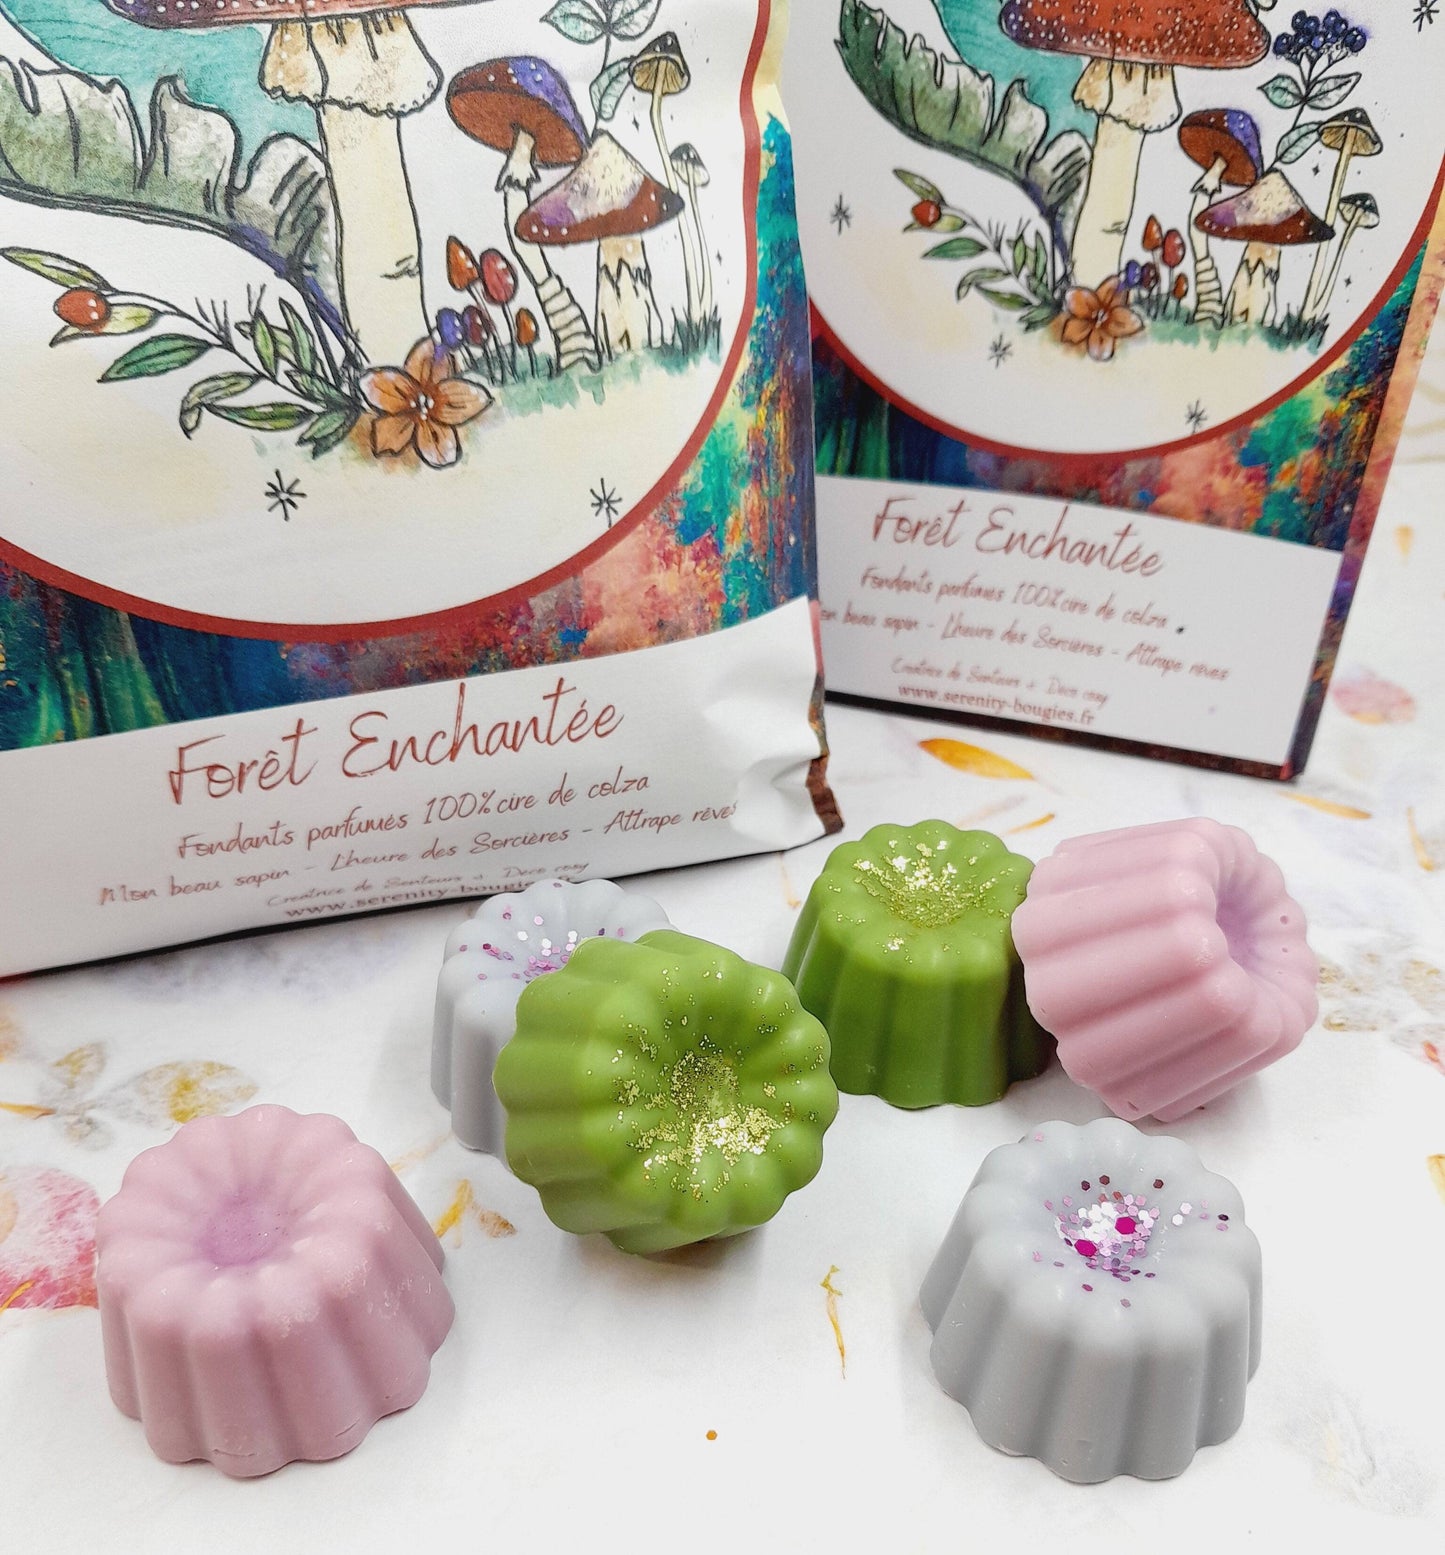 Scented Fondant Pack x6 - ENCHANTED FOREST Collection Limited Edition - 3 Geschmacksrichtungen